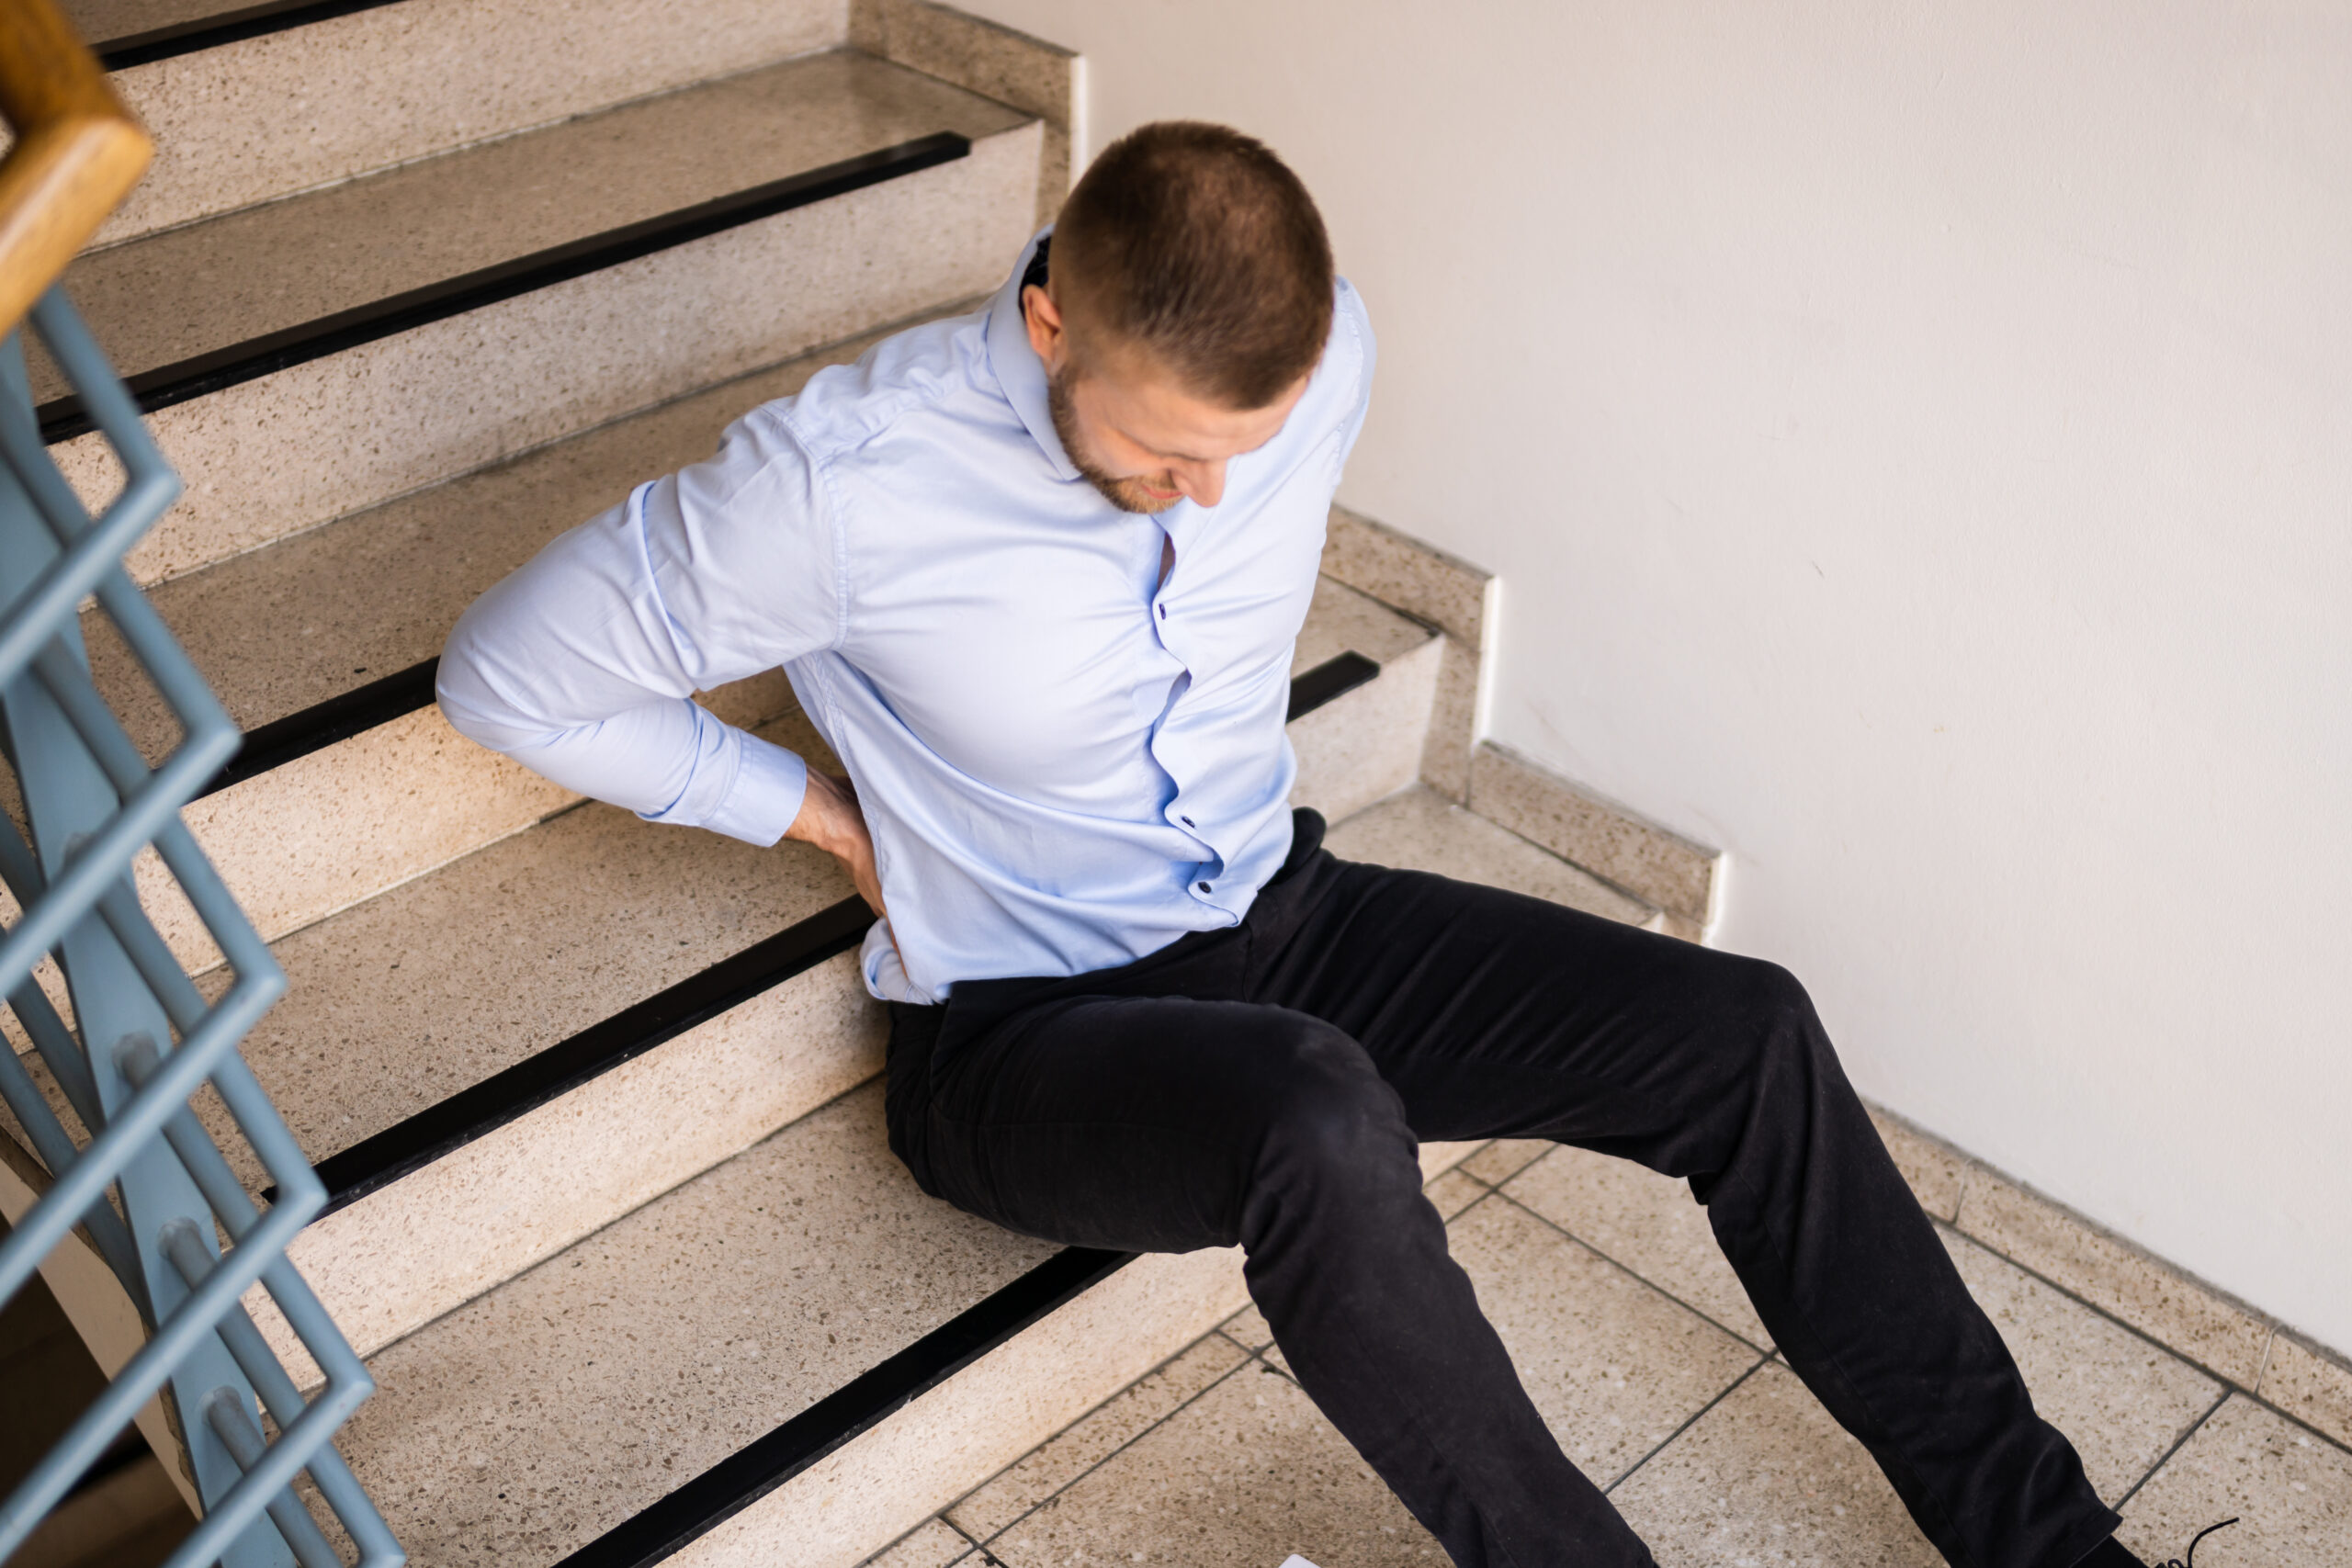 Man sitting at the bottom of the stairs, holding his back, wincing in pain - indicating he slipped and fell down the stairs